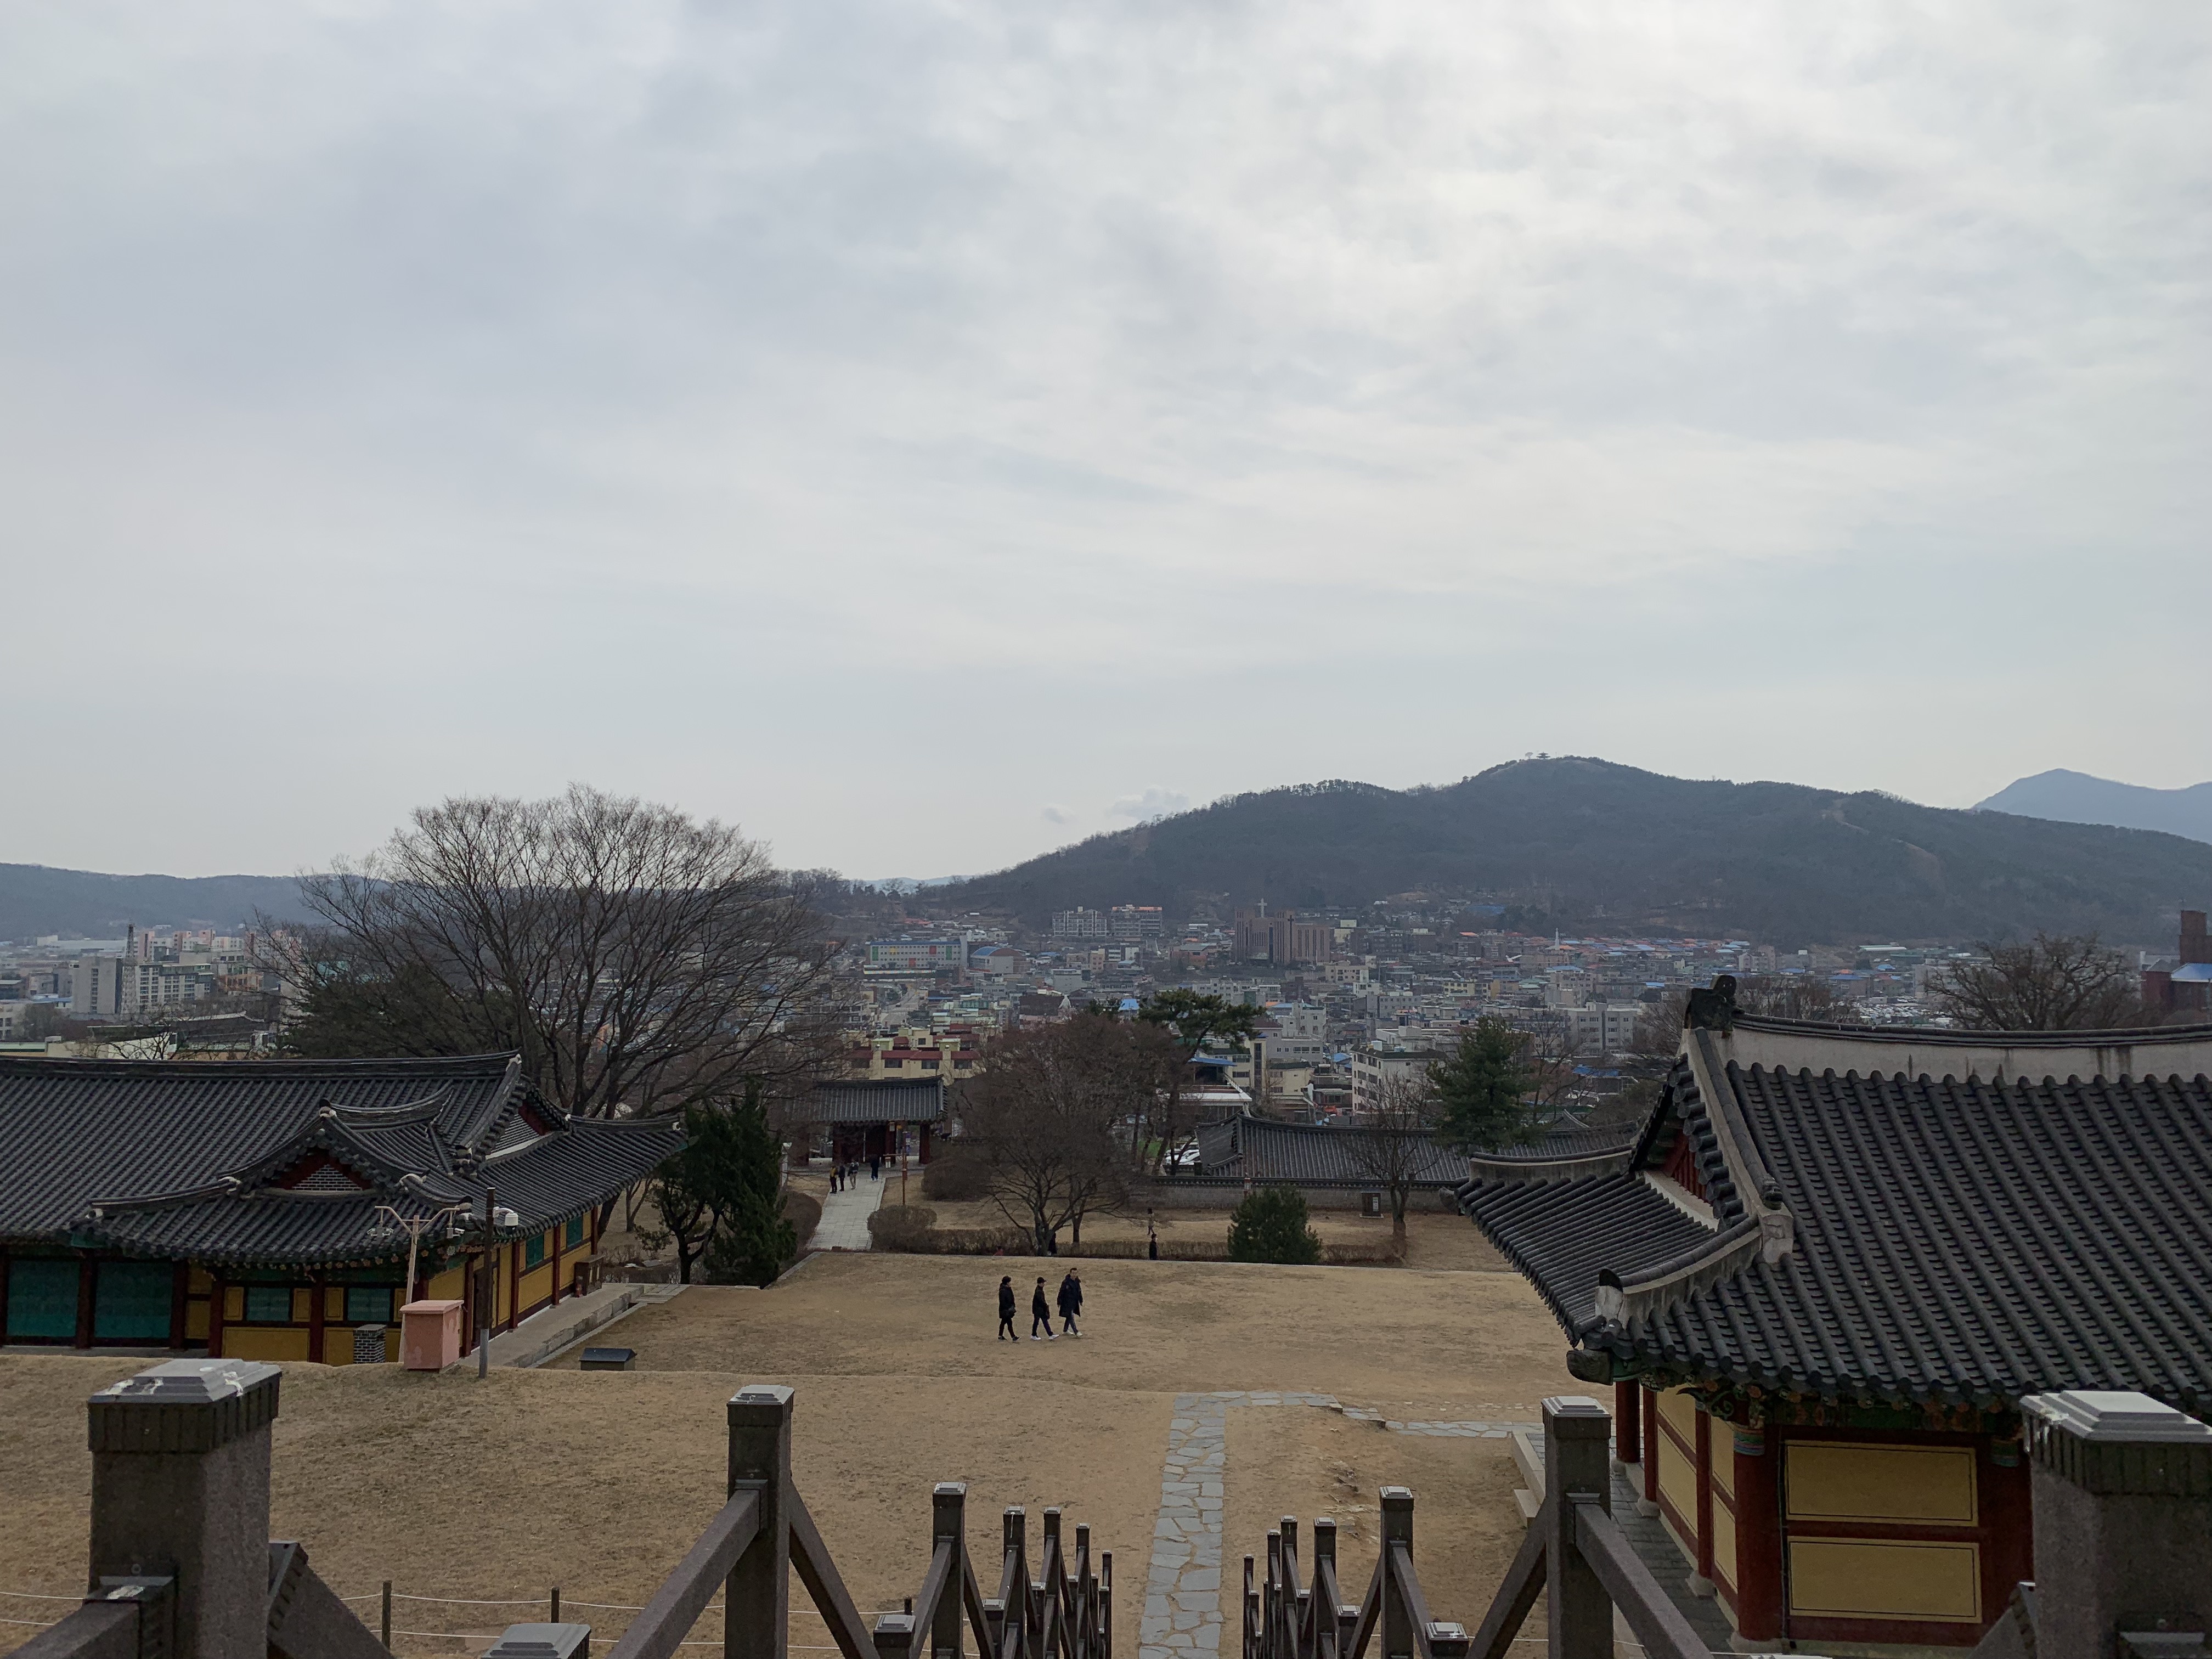 you can also see all of Ganghwa from here!